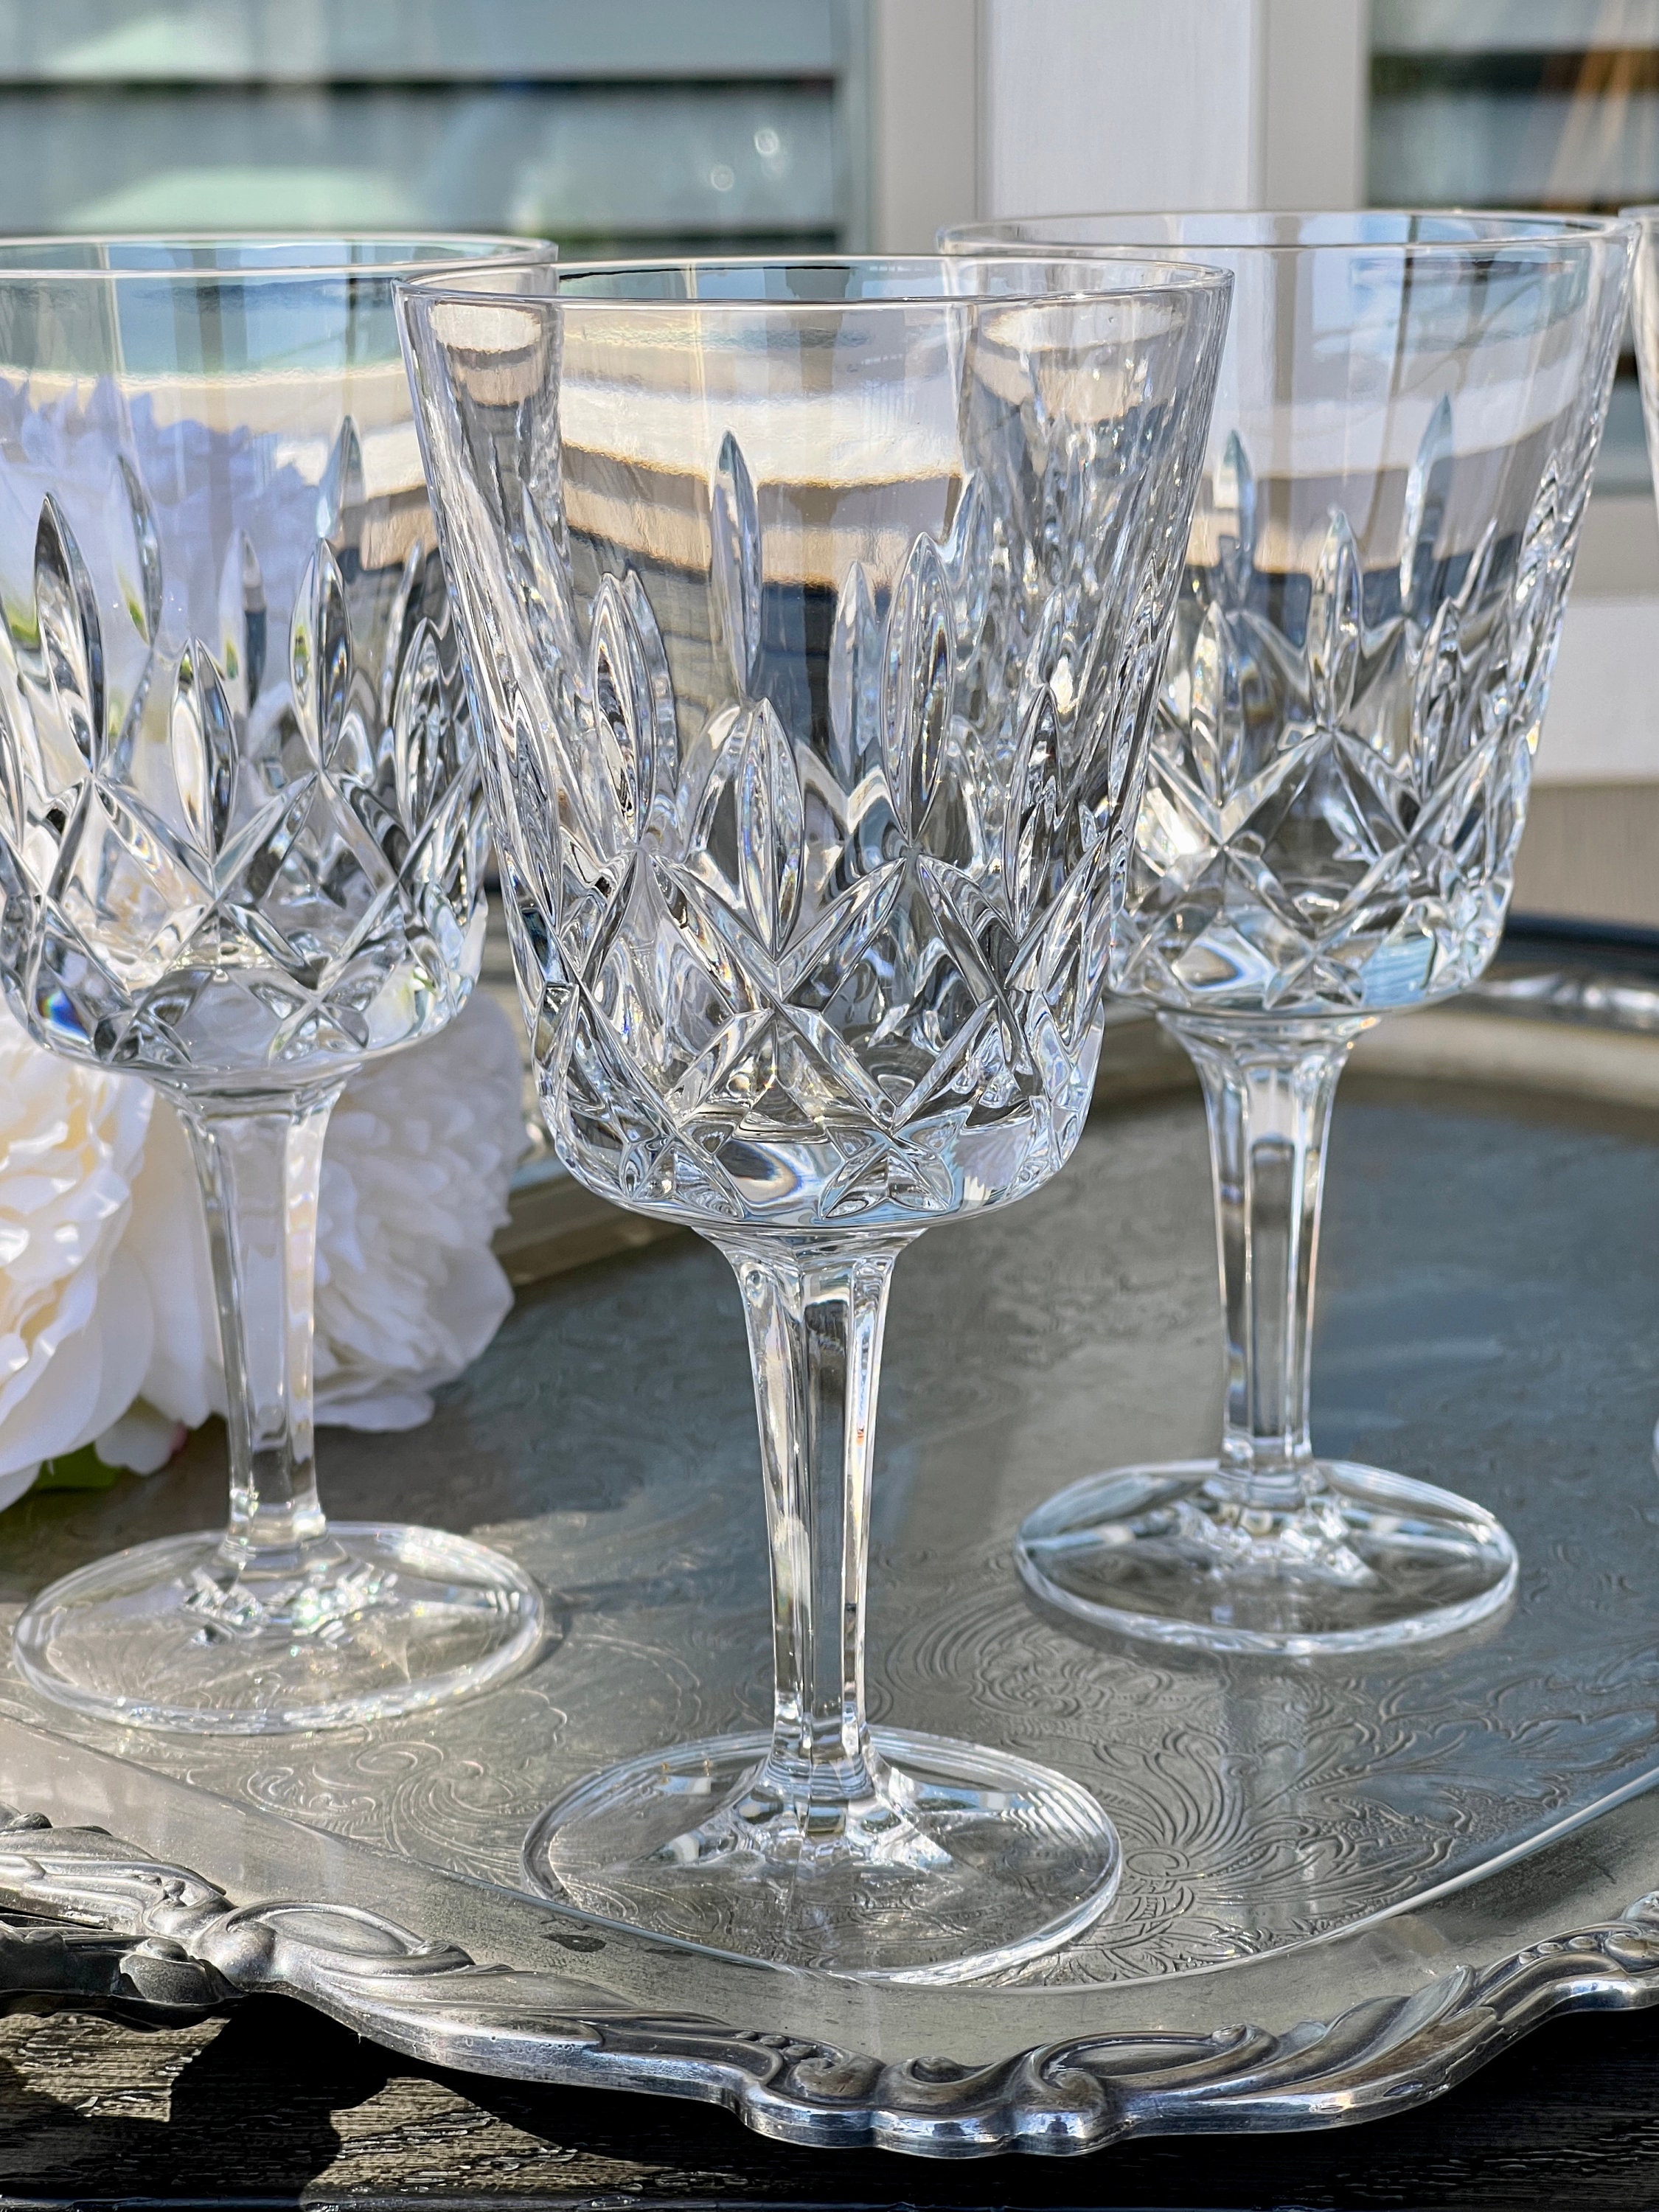 Gorham Crystal Water Glasses in king Edward Pattern, Four Hand Blown Stemmed  Water Goblets, Elegant Cut Crystal Traditional Drinking Glass 